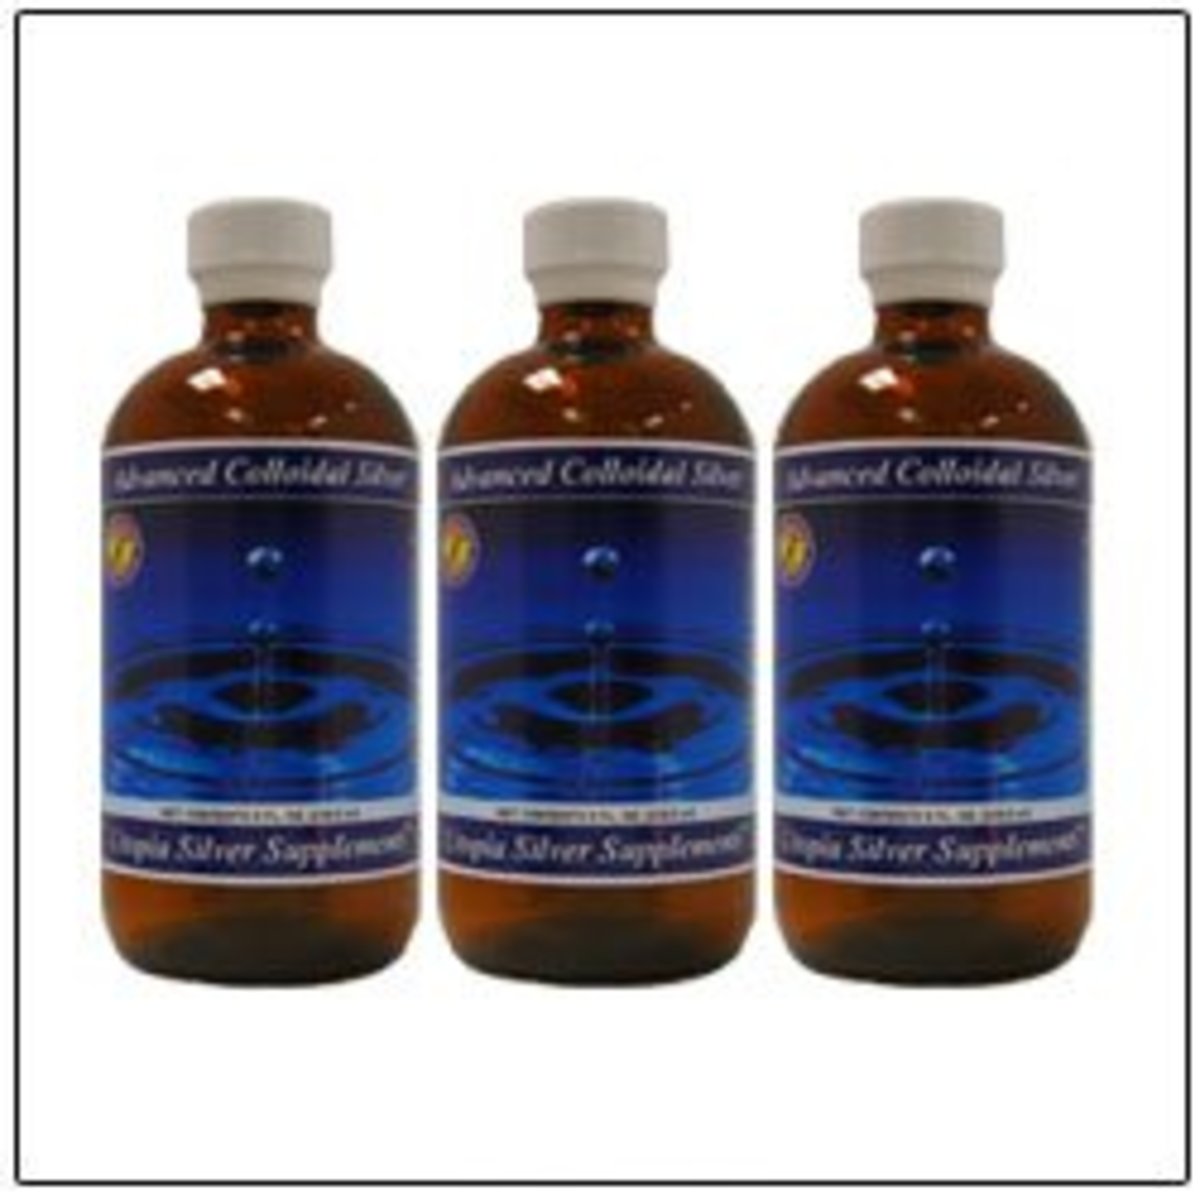 Dosage instructions for using Colloidal Silver